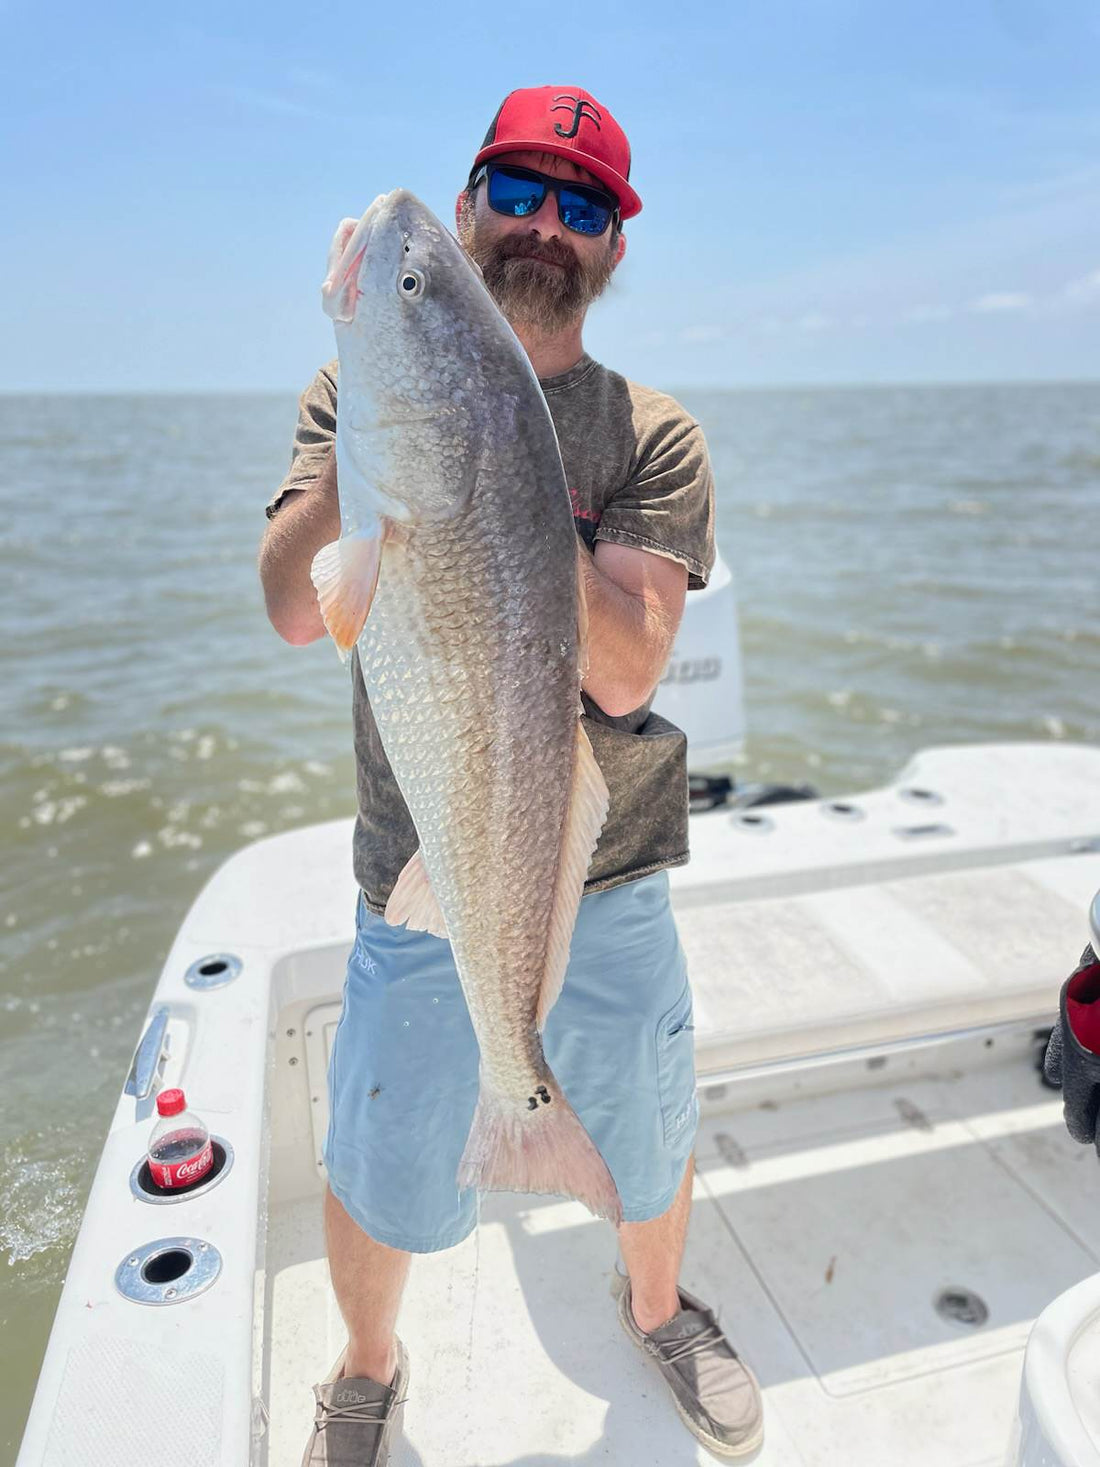 Louisiana always Has some of the Best Fishing